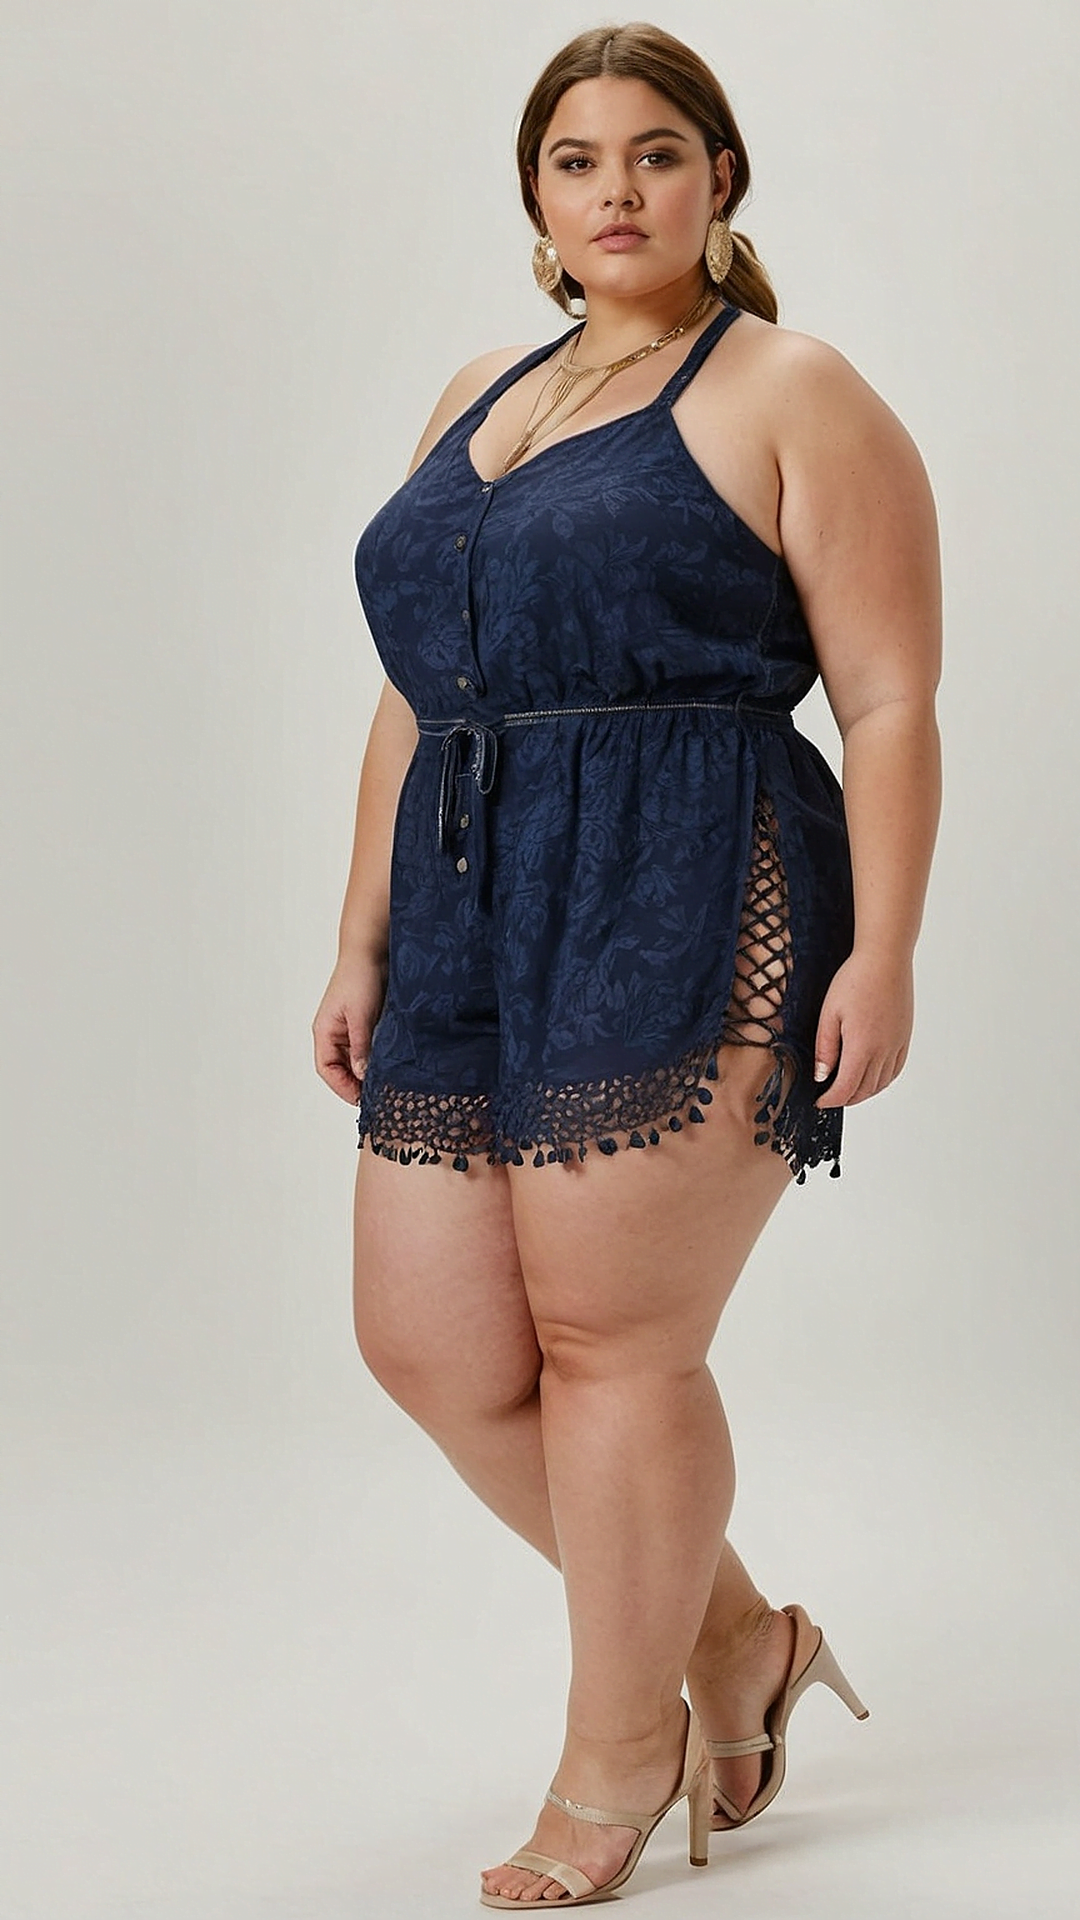 Outdoor Party Outfit Ideas for Plus-Sized Women in Summer